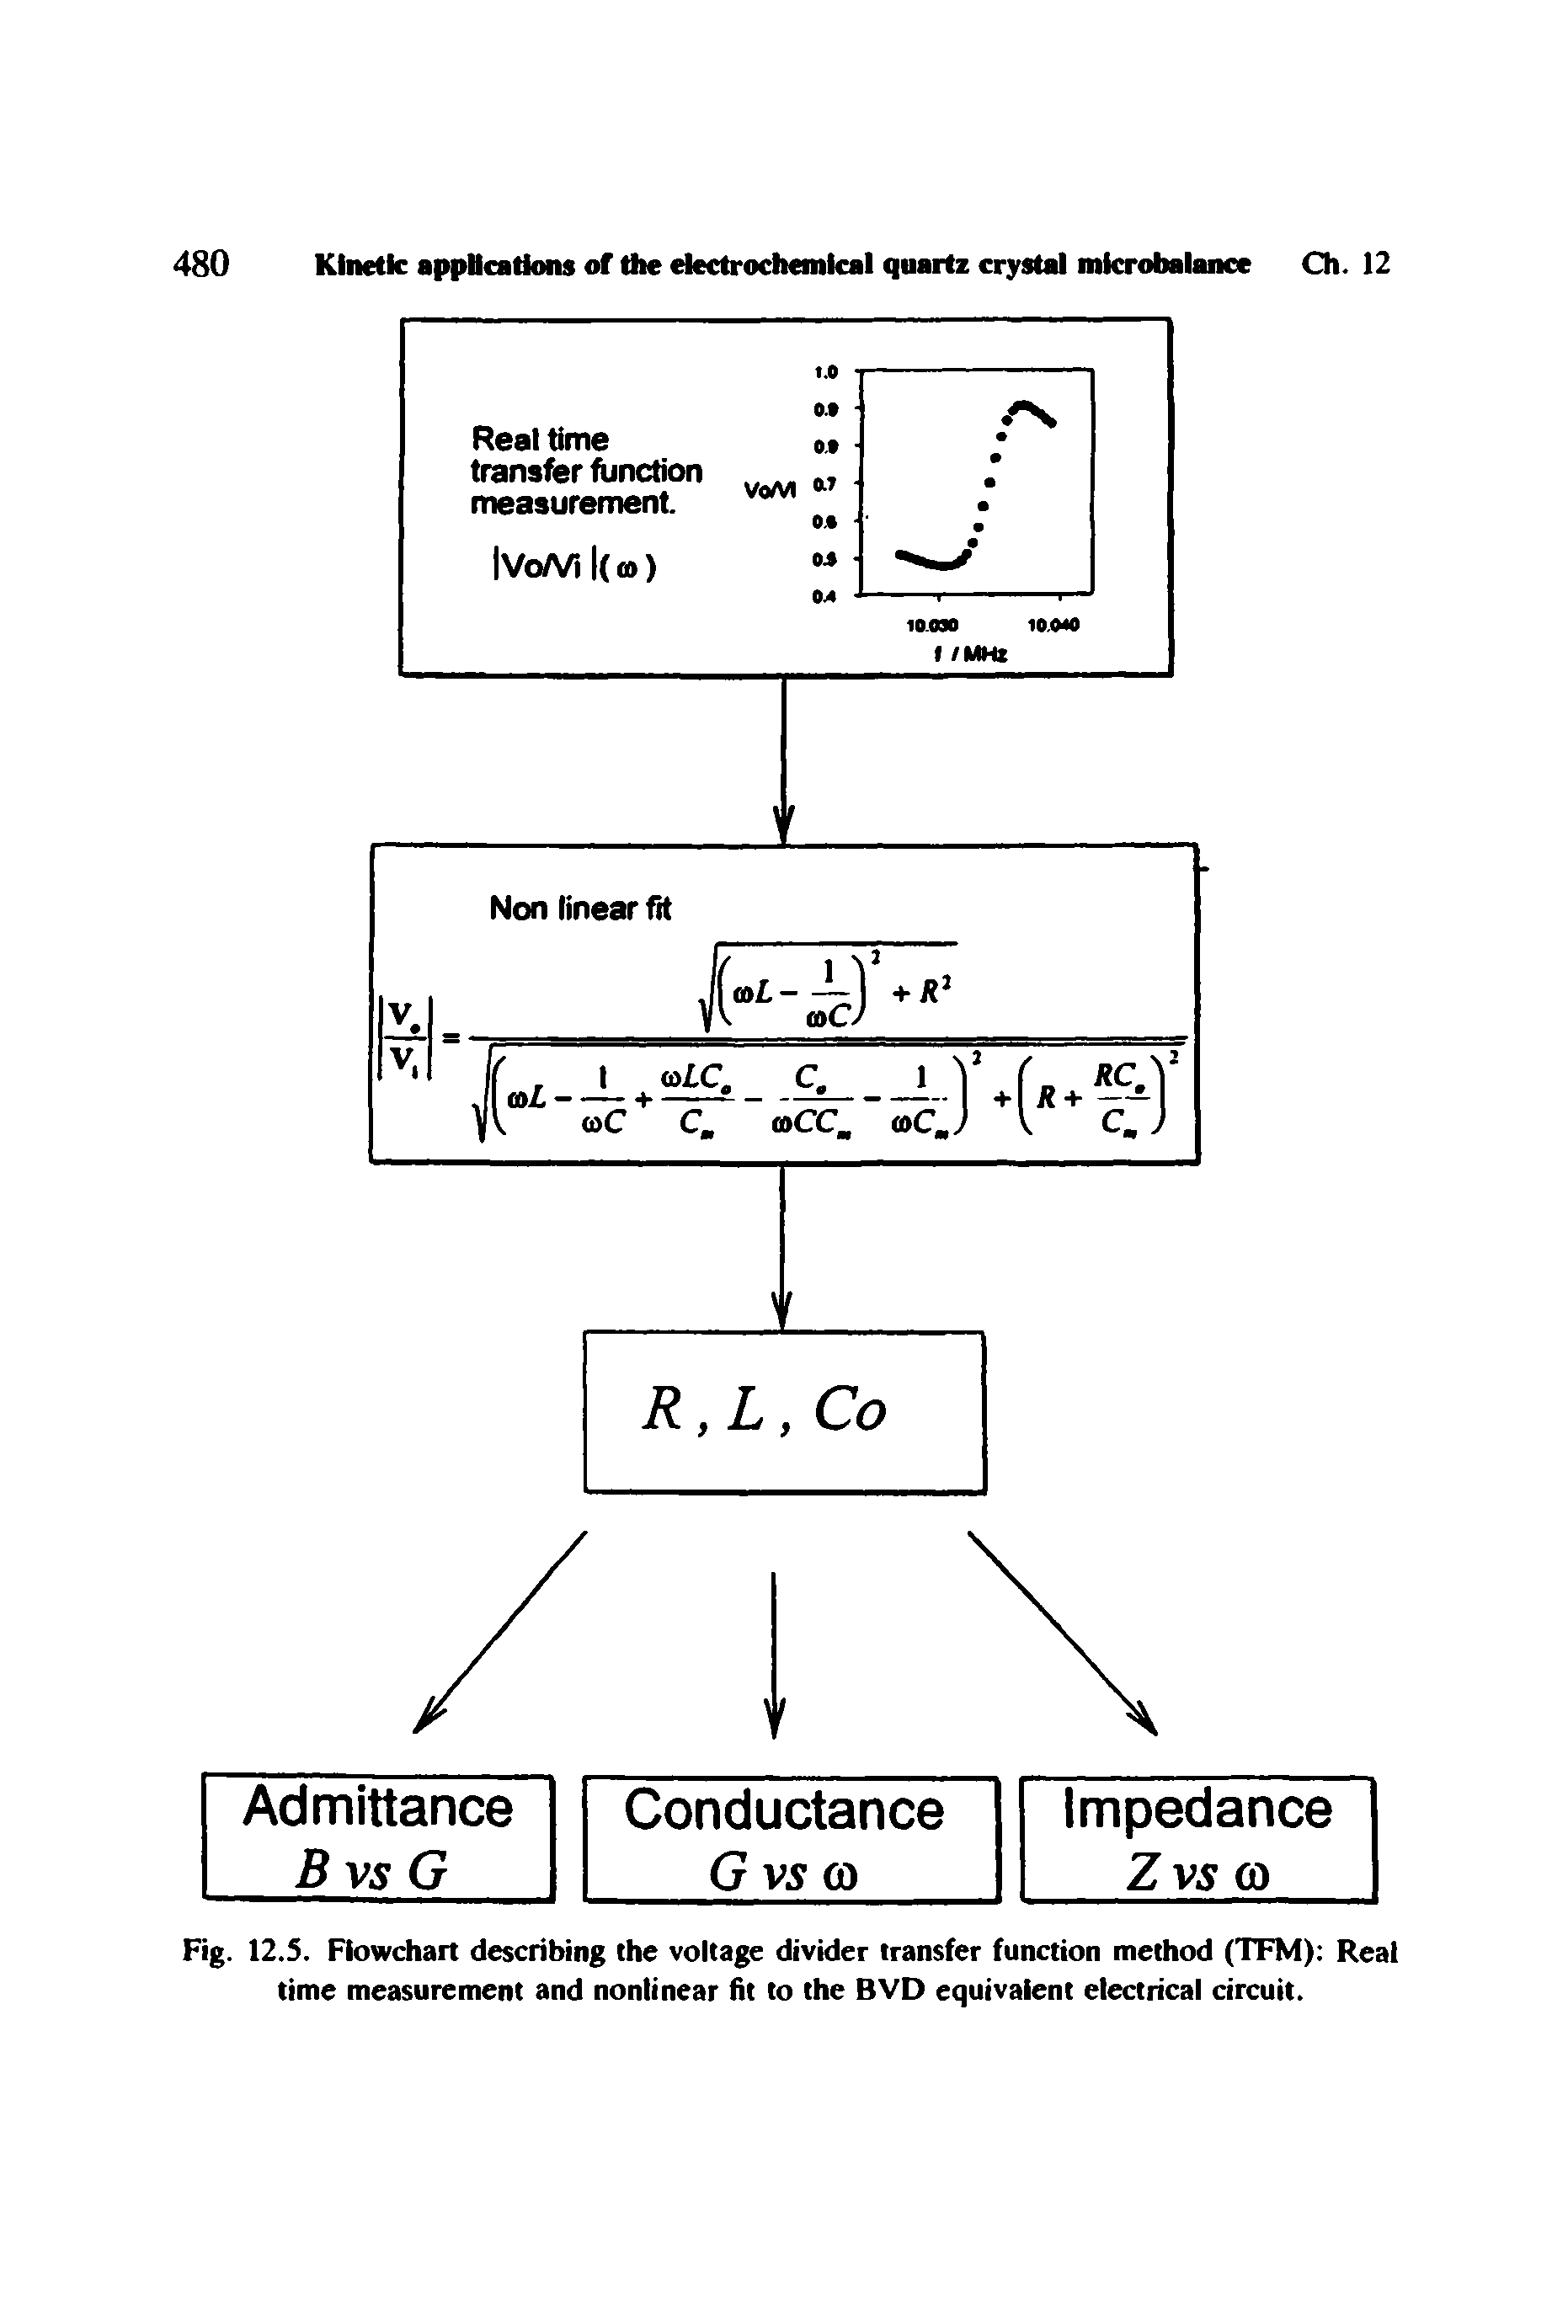 Fig. 12.5. Flowchart describing the voltage divider transfer function method (TFM) Real time measurement and nonlinear fit to the BVD equivalent electrical circuit.